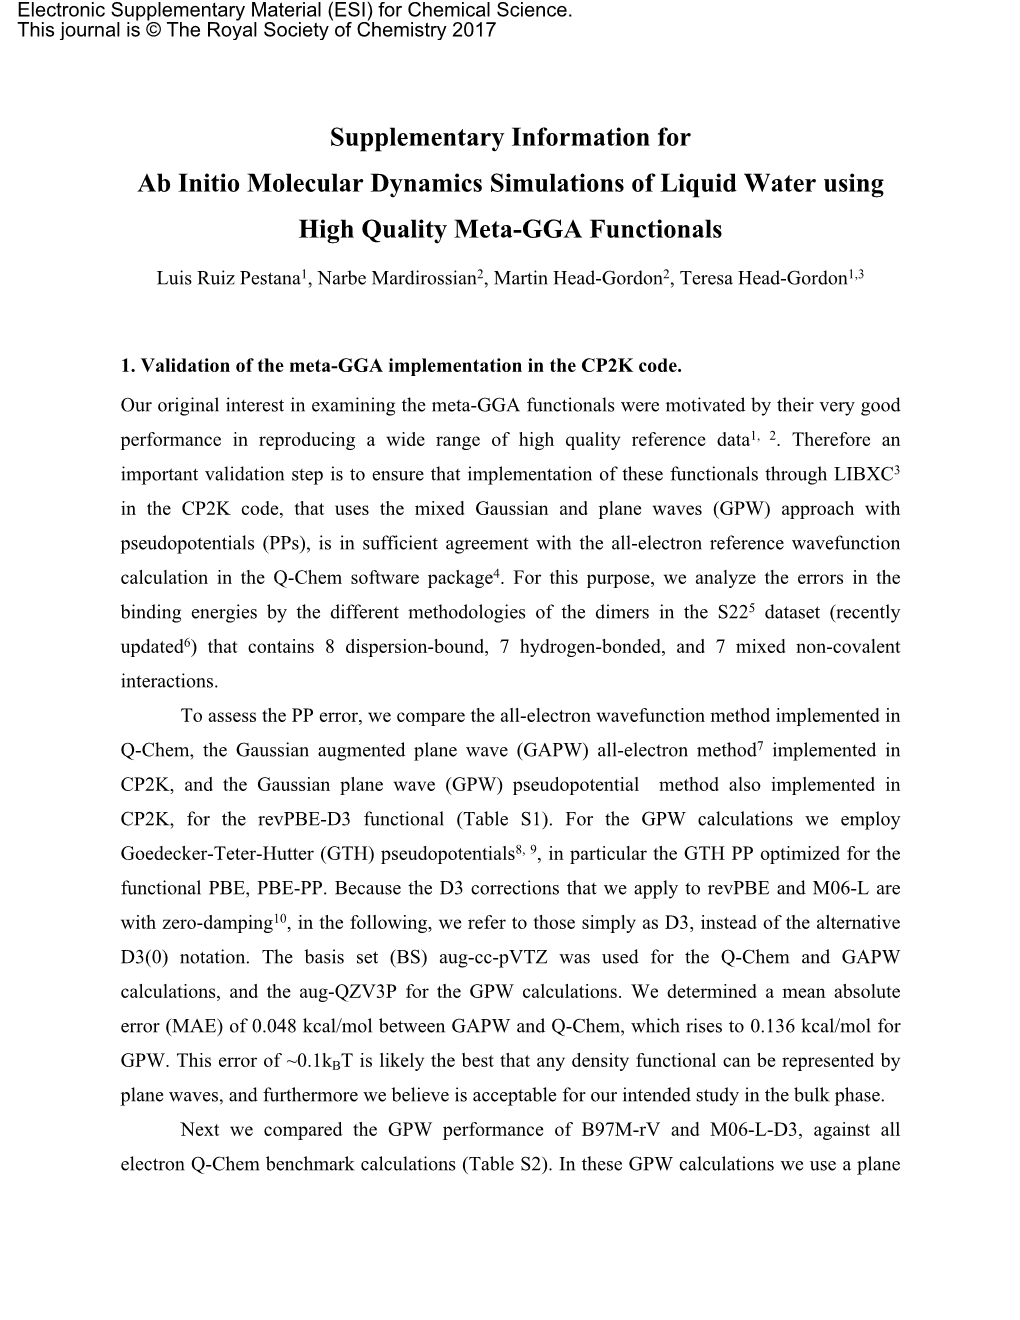 Supplementary Information for Ab Initio Molecular Dynamics Simulations of Liquid Water Using High Quality Meta-GGA Functionals